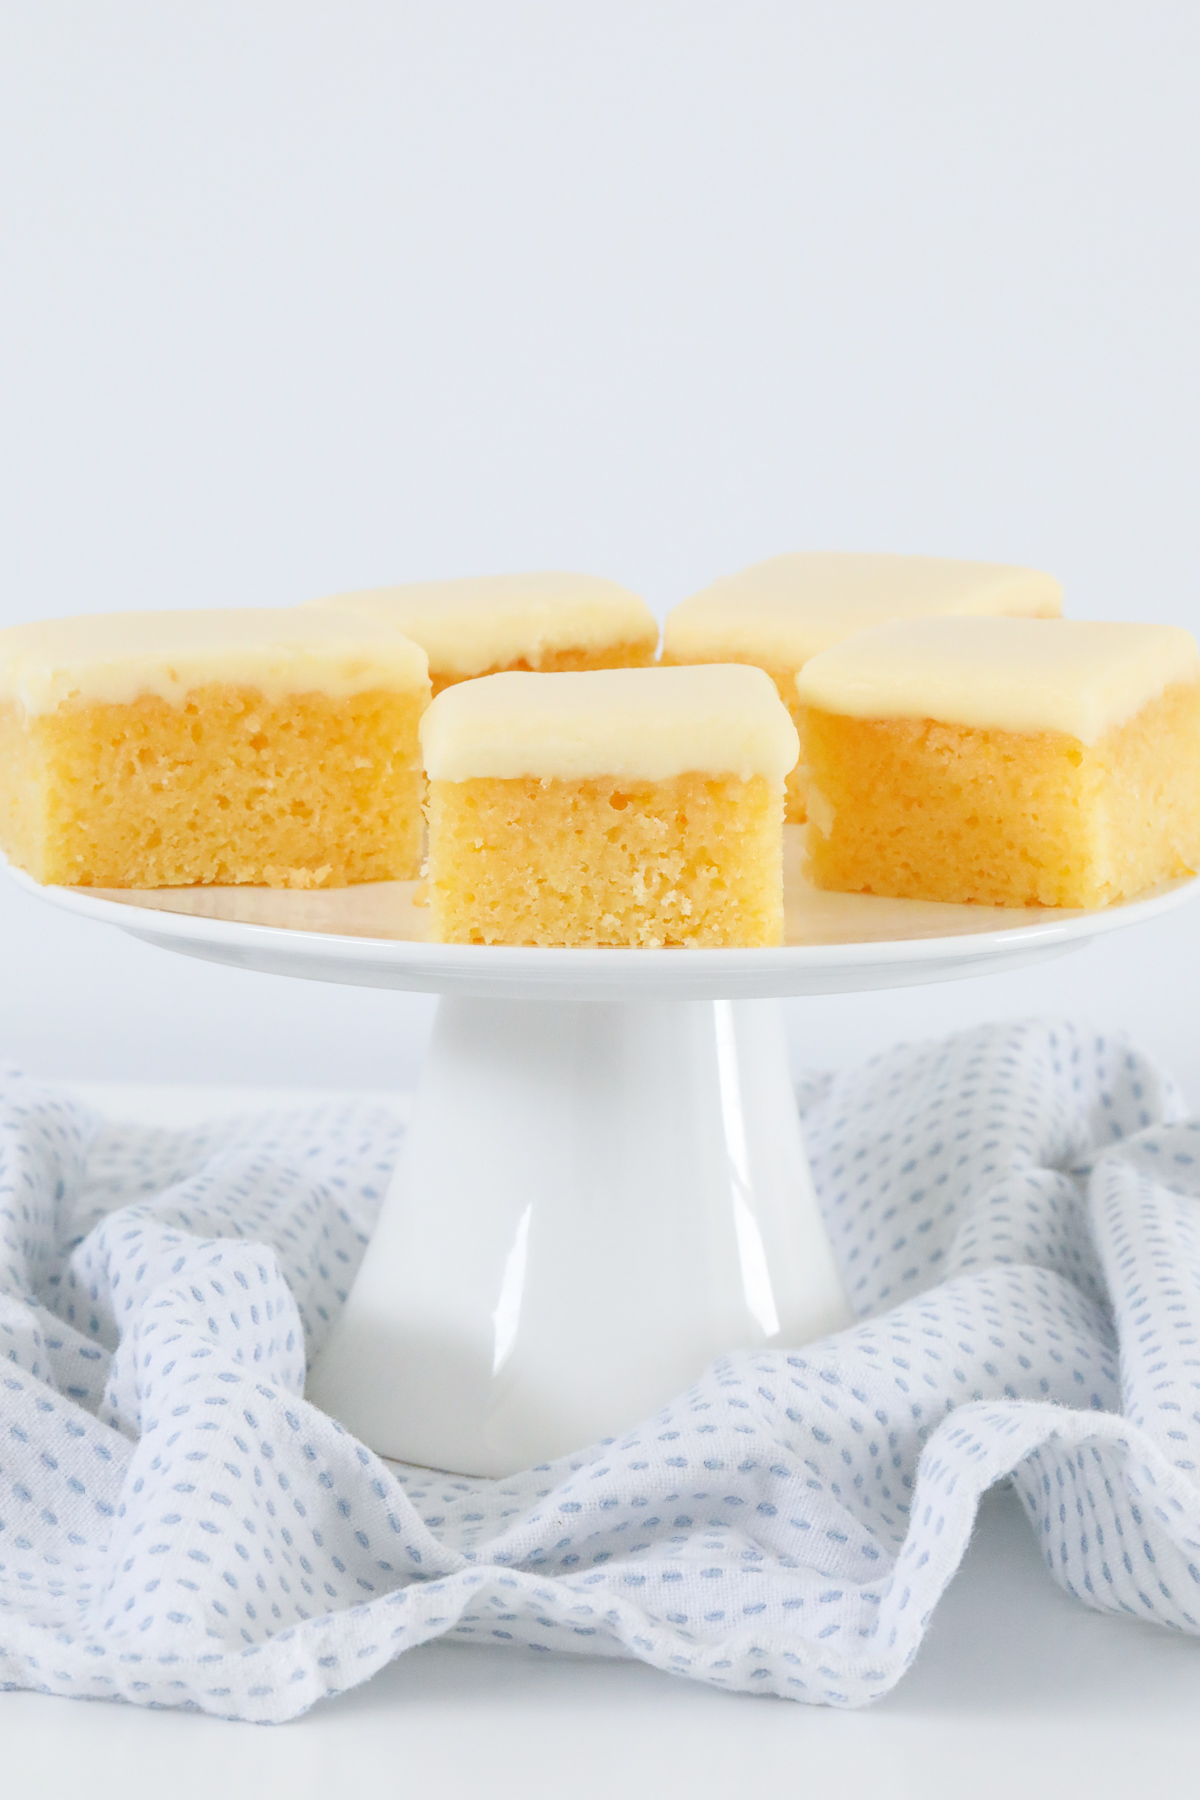 Lemon frosting on pieces of a golden slice, served on a cake stand